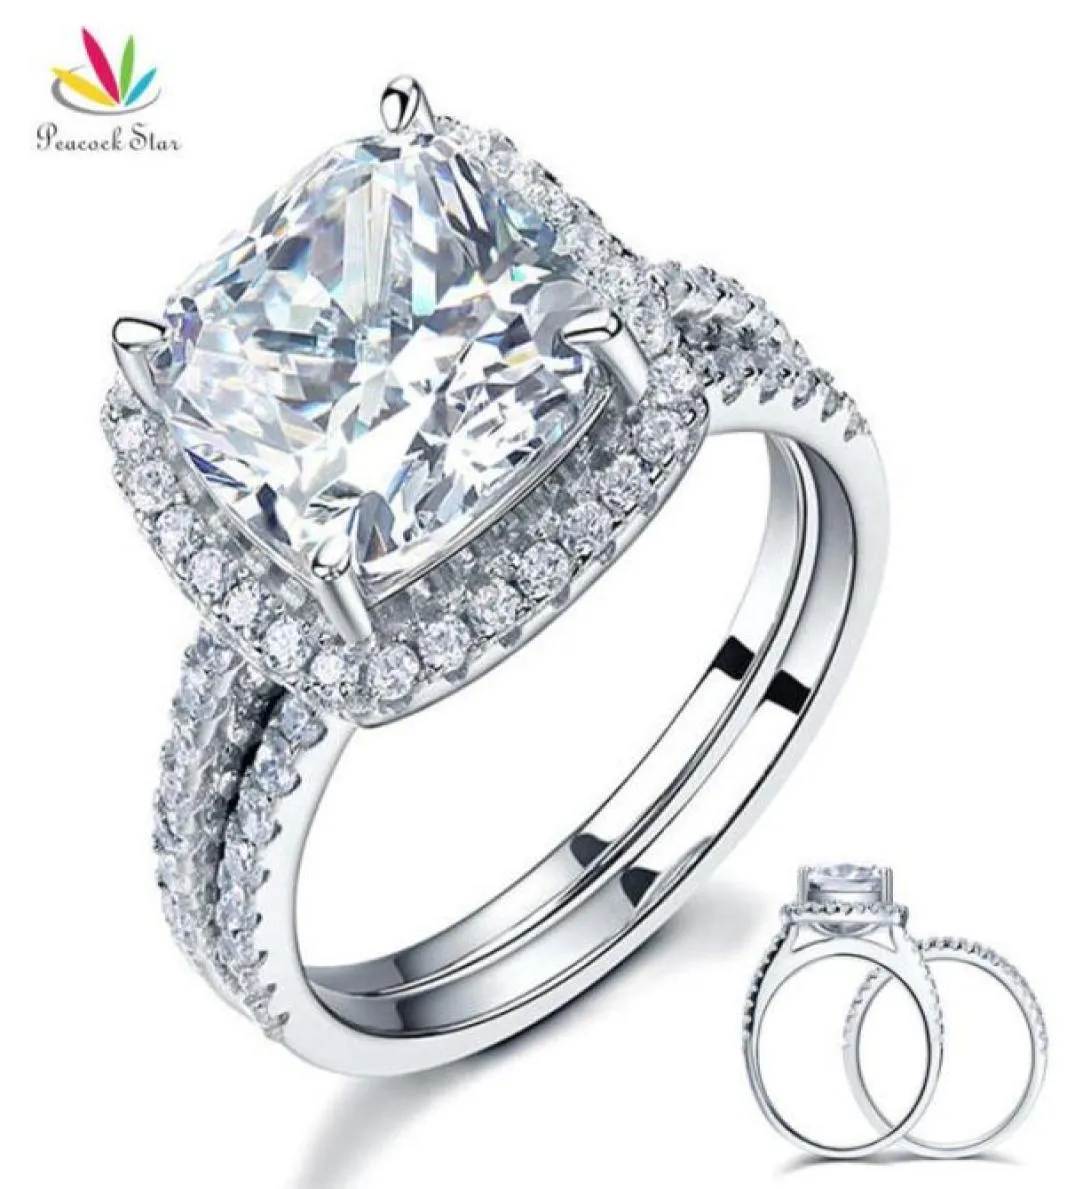 PEACOCK STAR 5 CT CUSHION CUT Wedding Engagement Ring Set Solid 925 Sterling Silver Jewelry CFR8205 J1907157591659500313